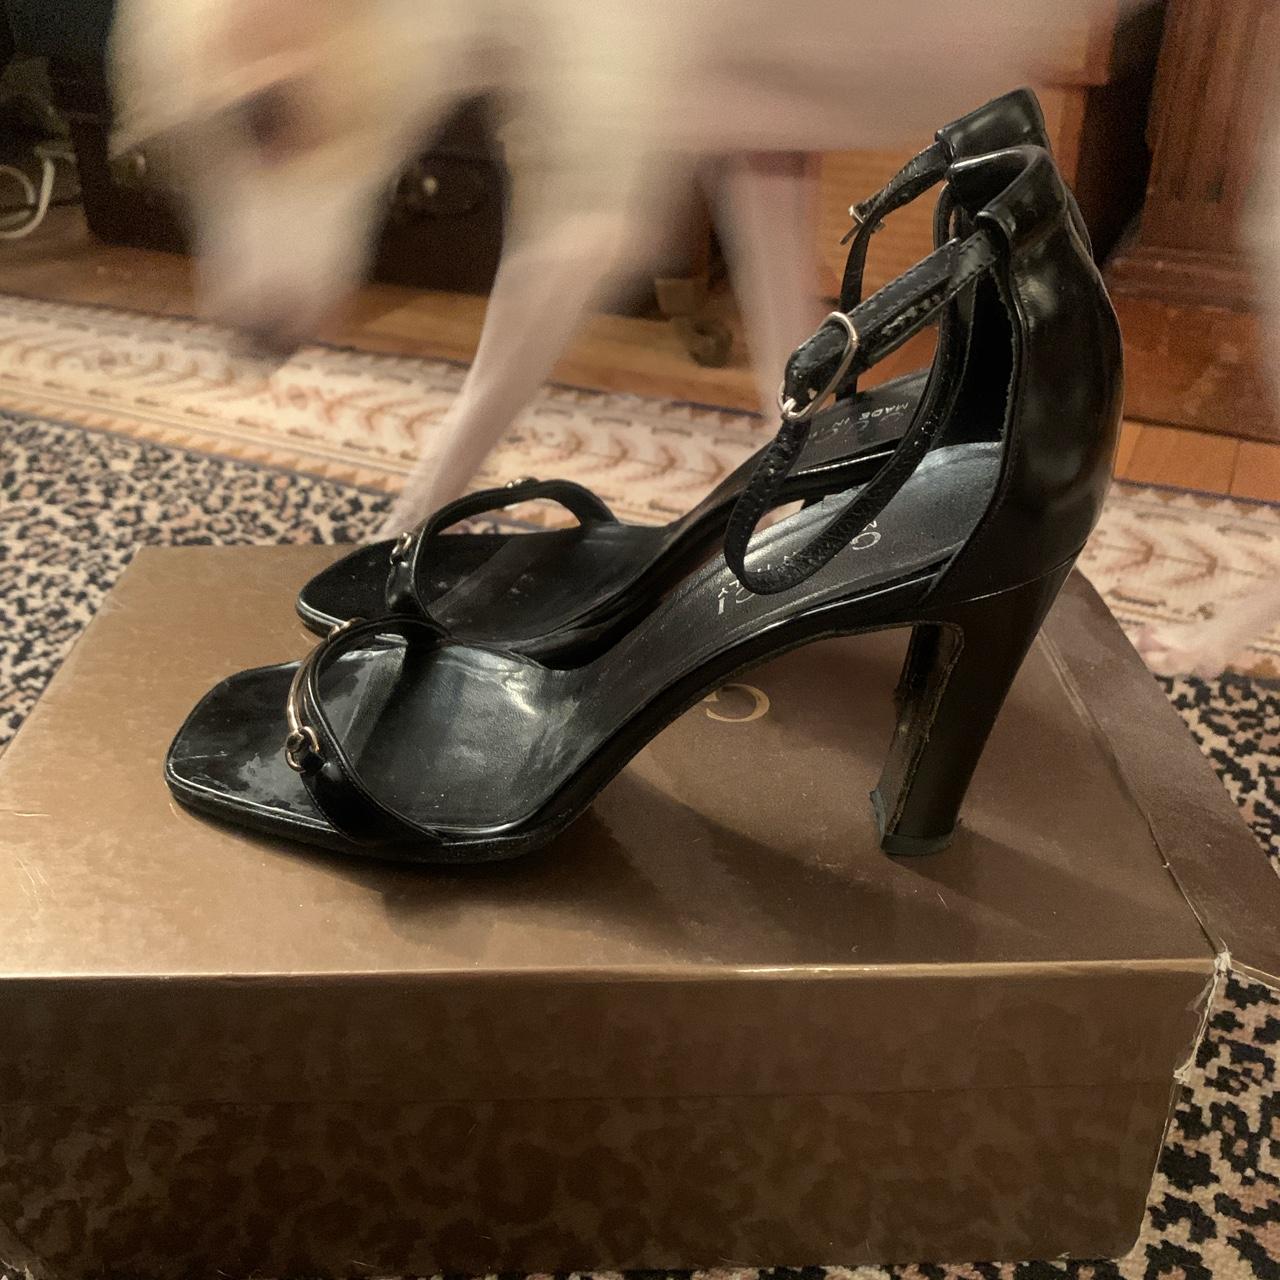 Gucci Black Leather Strappy Heels I took good care - Depop